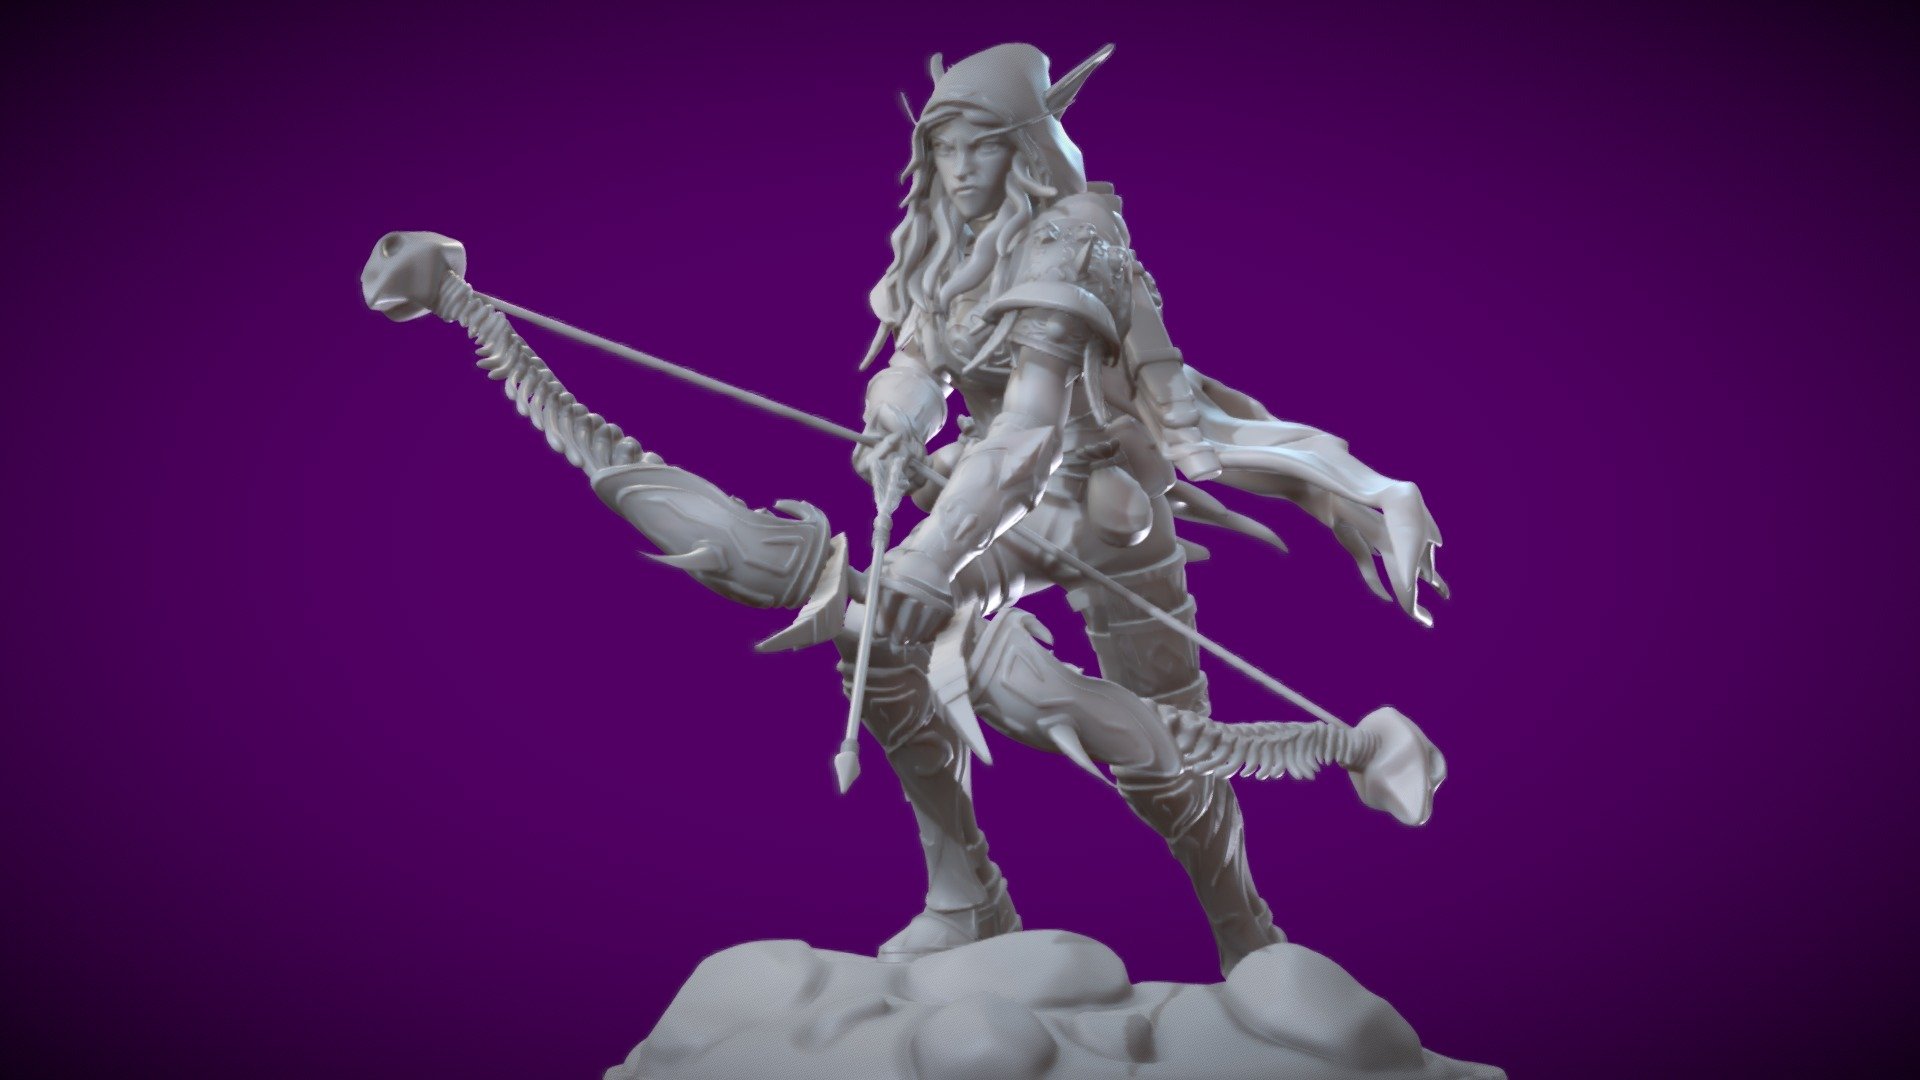 This is a fanart of Sylvanas Windrunner

Had play WoW for awhile and really like the character design of Sylvanas, so decide to make one of my own 3d model